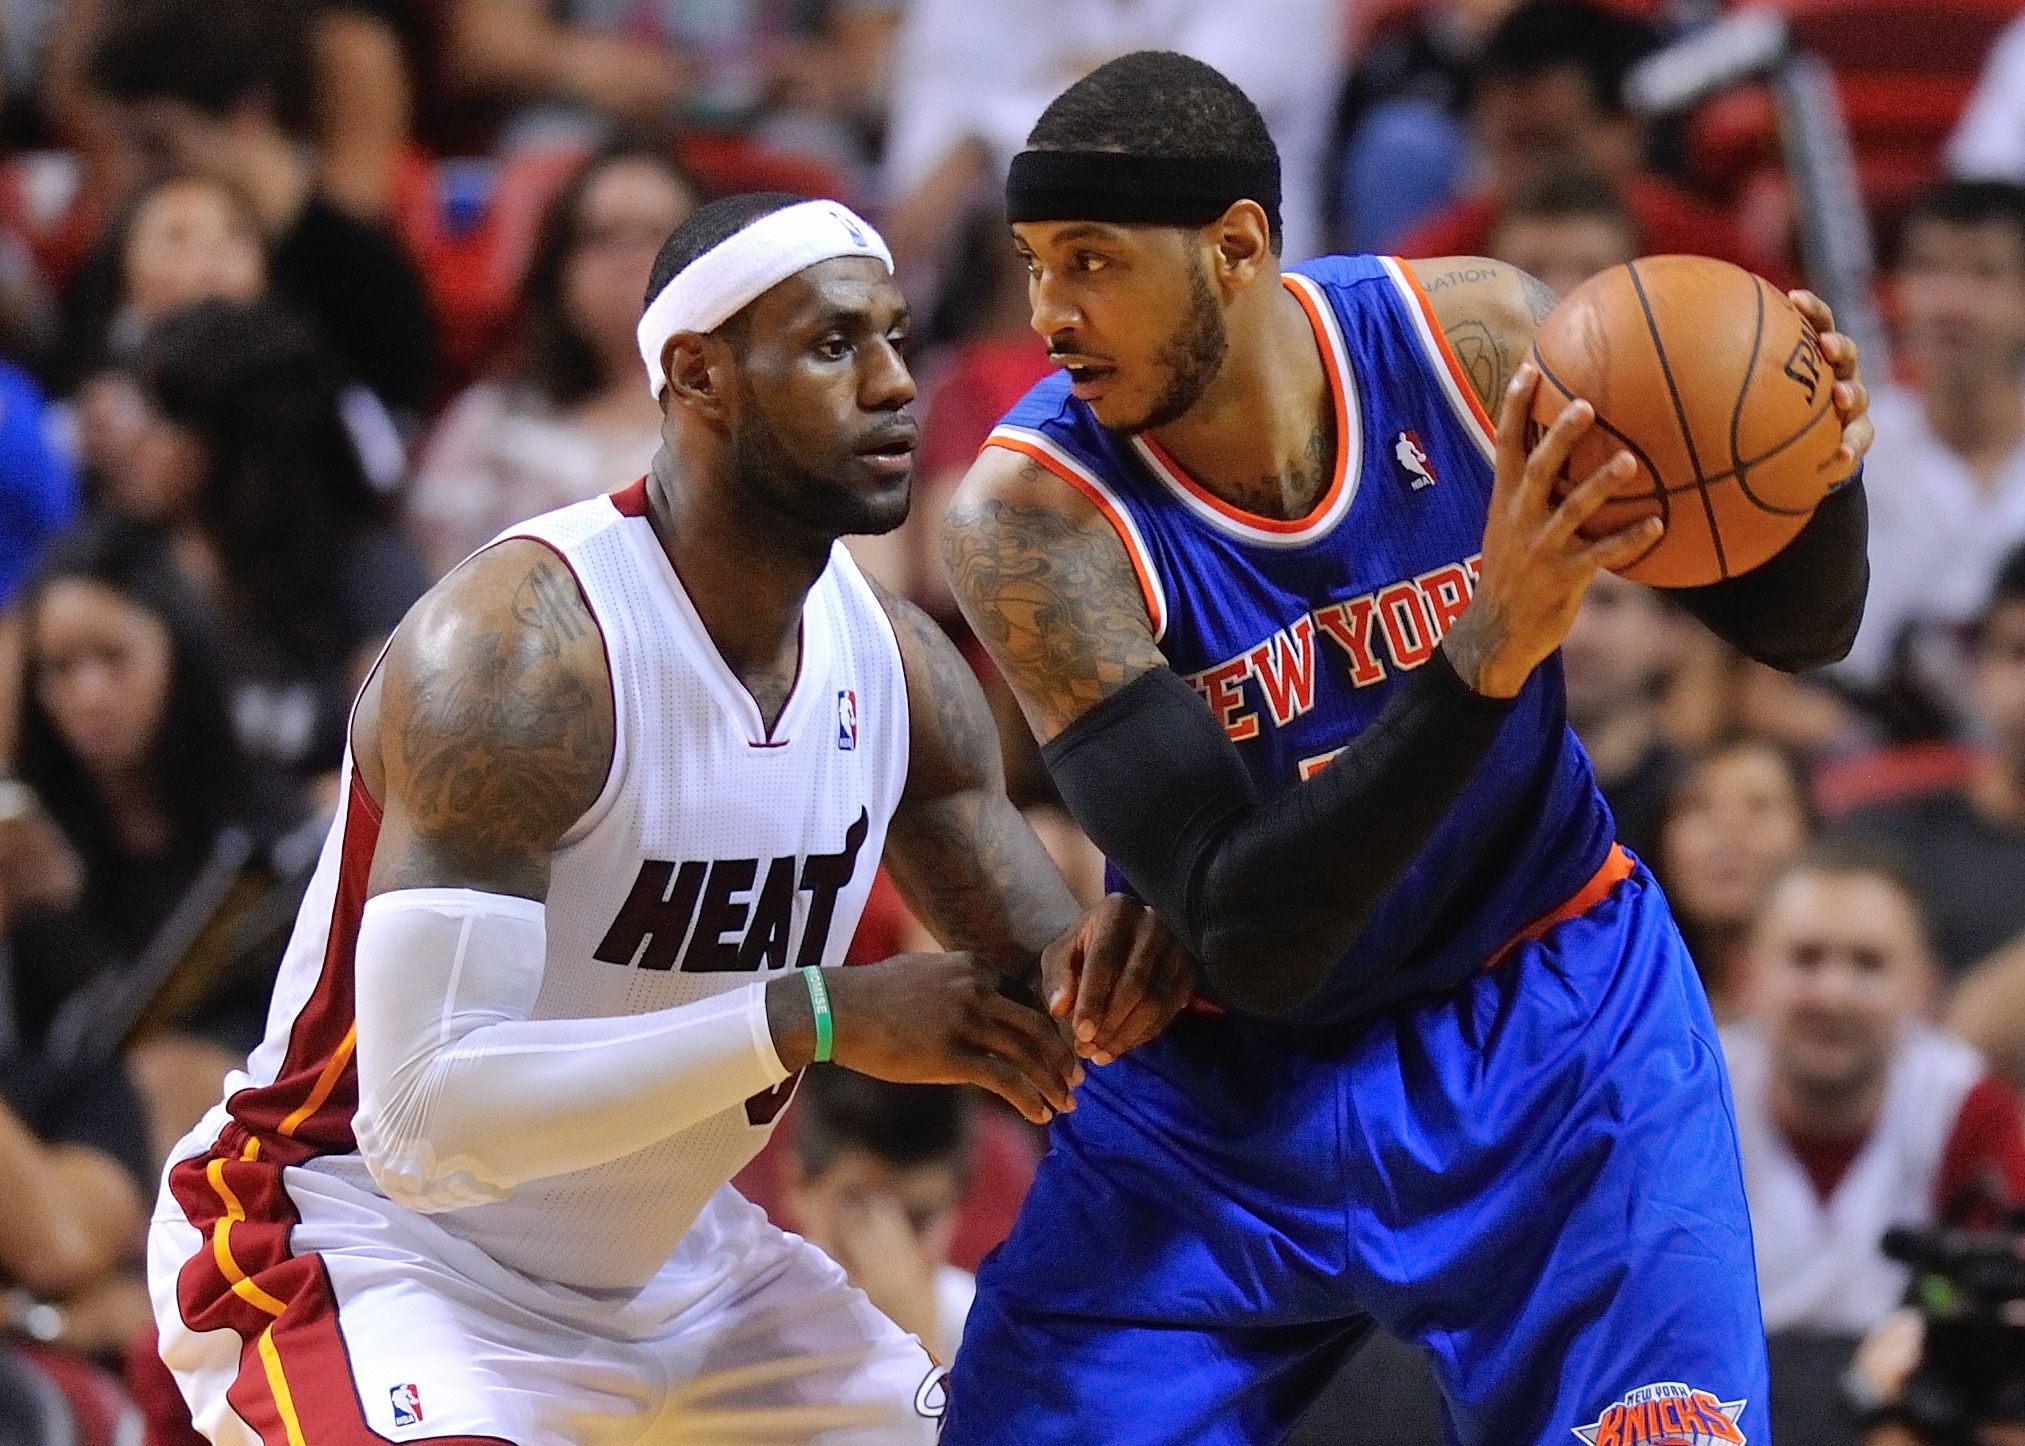 LeBron vs. Carmelo: The story of their epic first battle